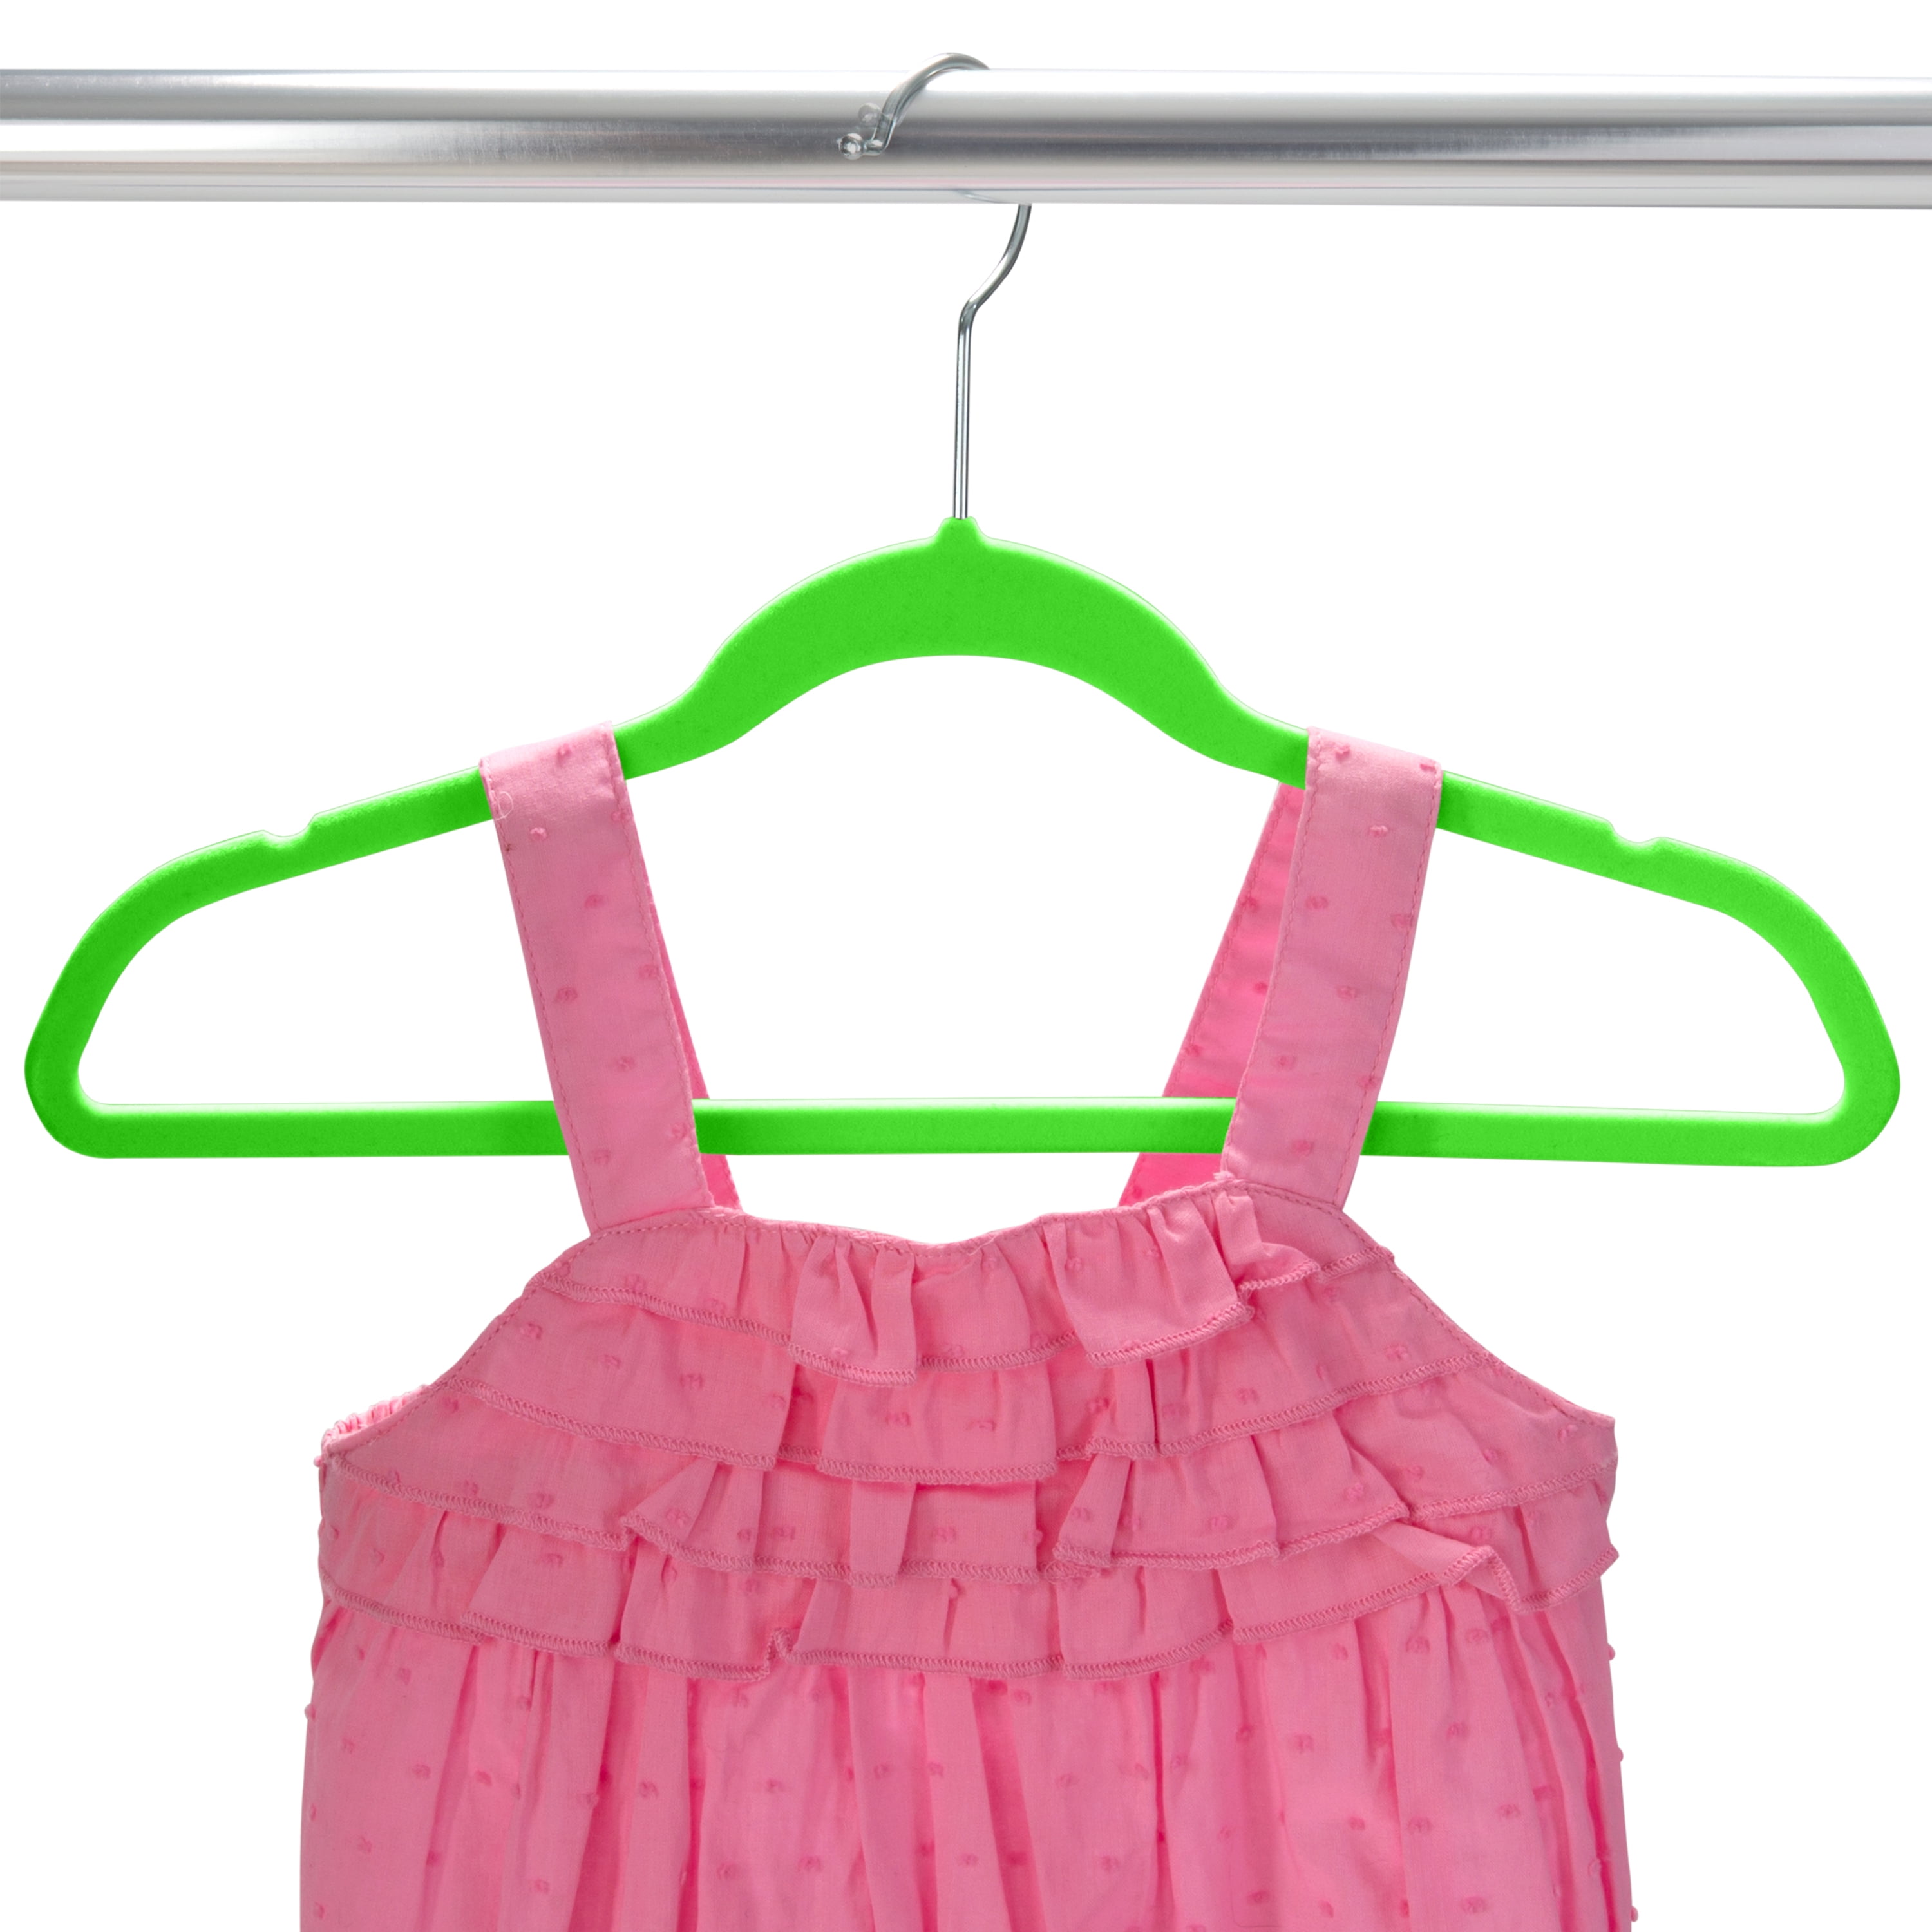 Purchase Wholesale baby clothes hangers. Free Returns & Net 60